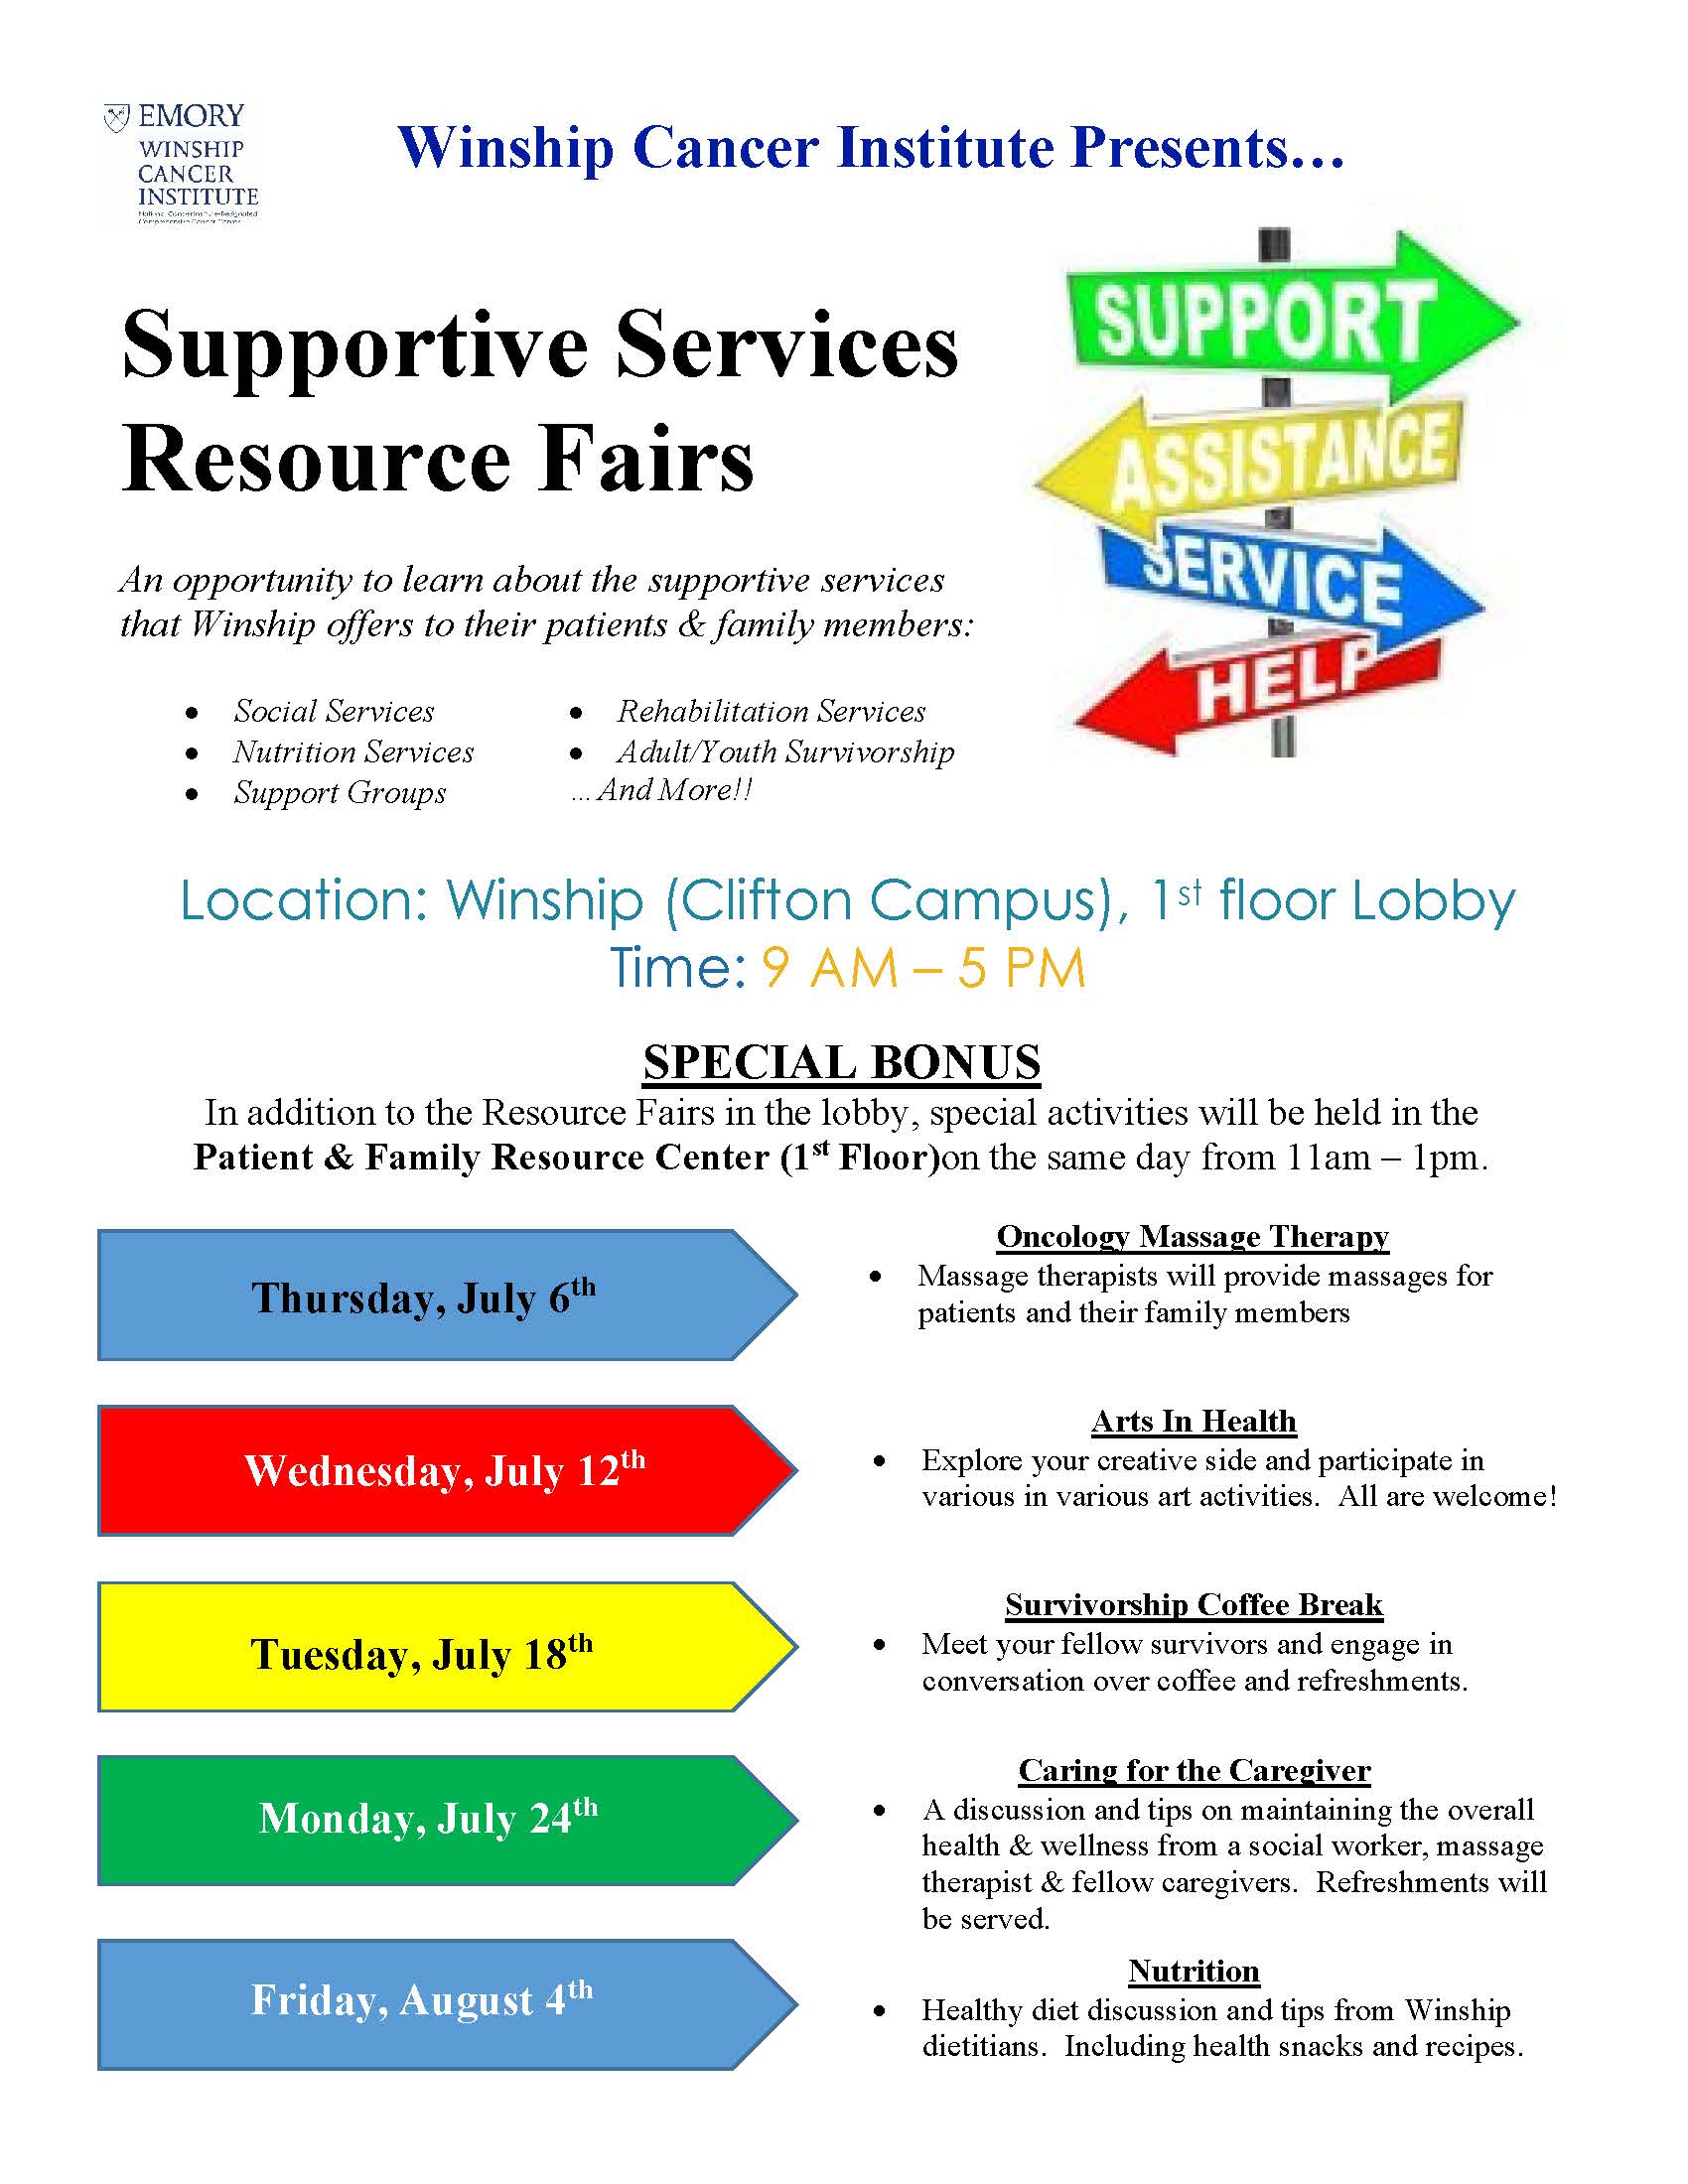 Supportive Services Resource Fair Flyer